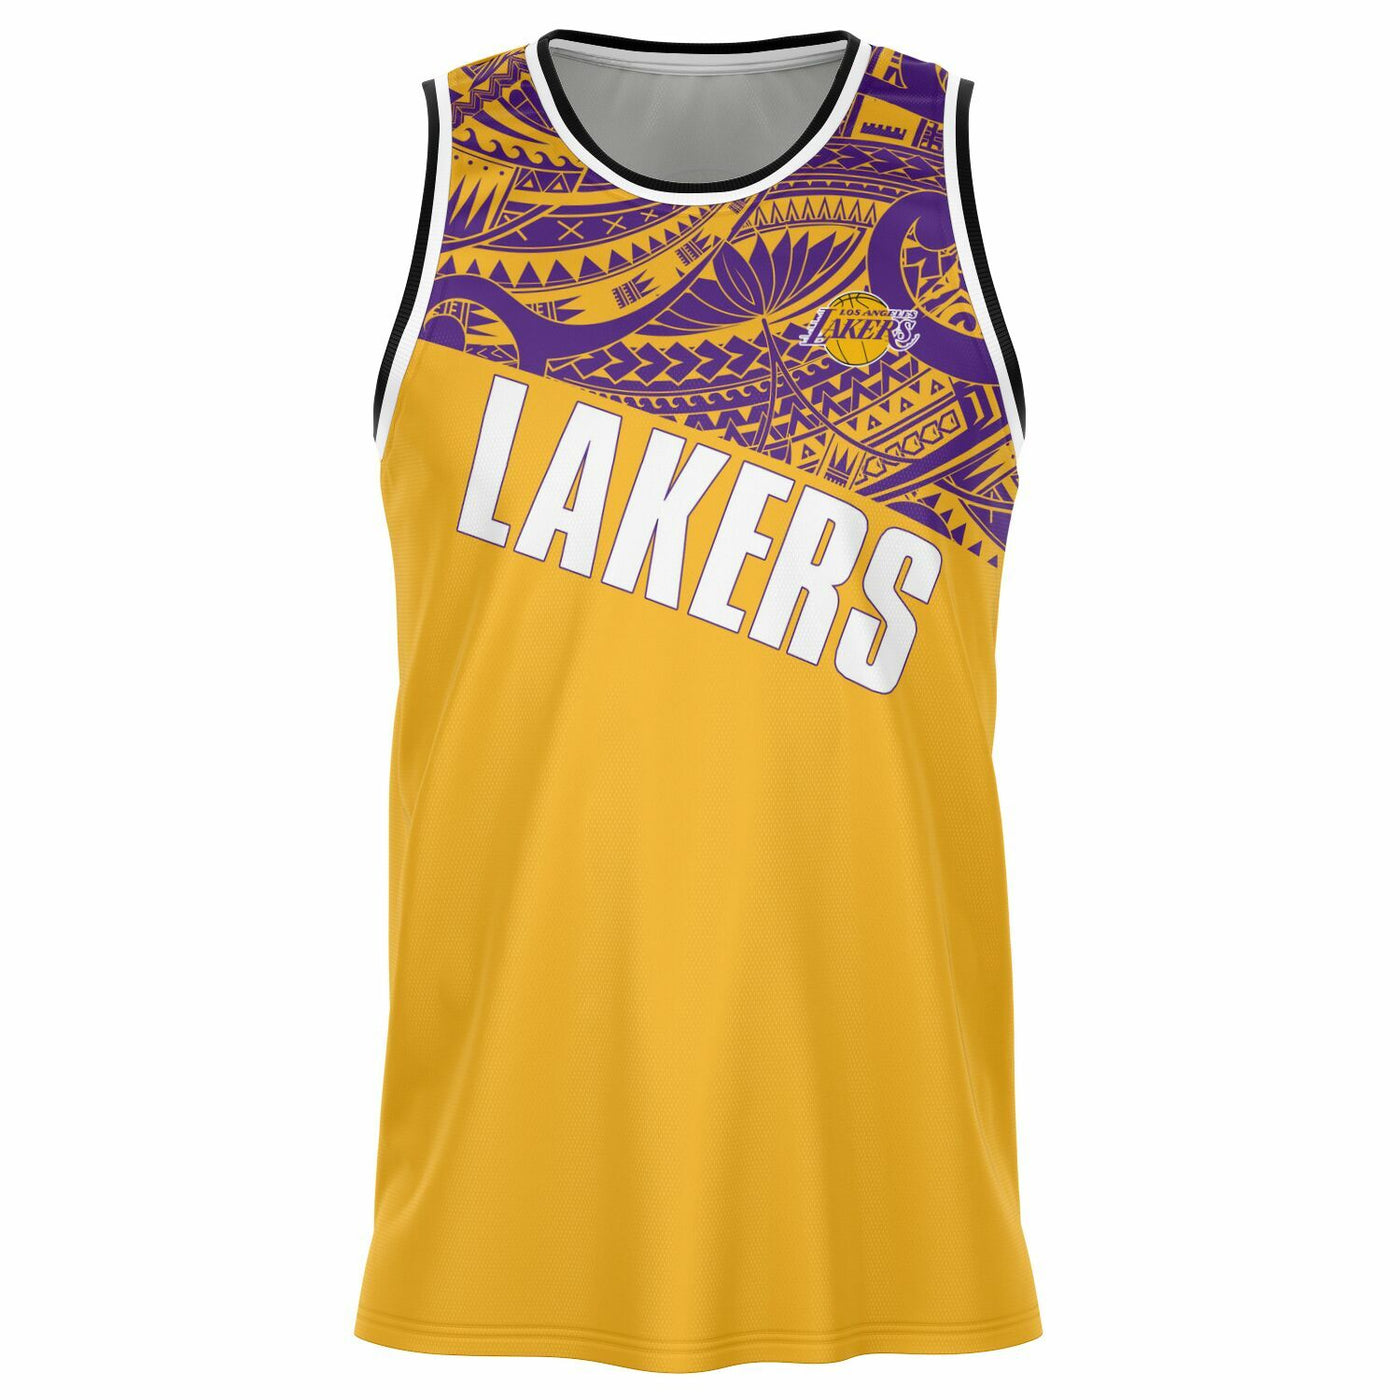 Subliminator Los Angeles Lakers Basketball Jersey